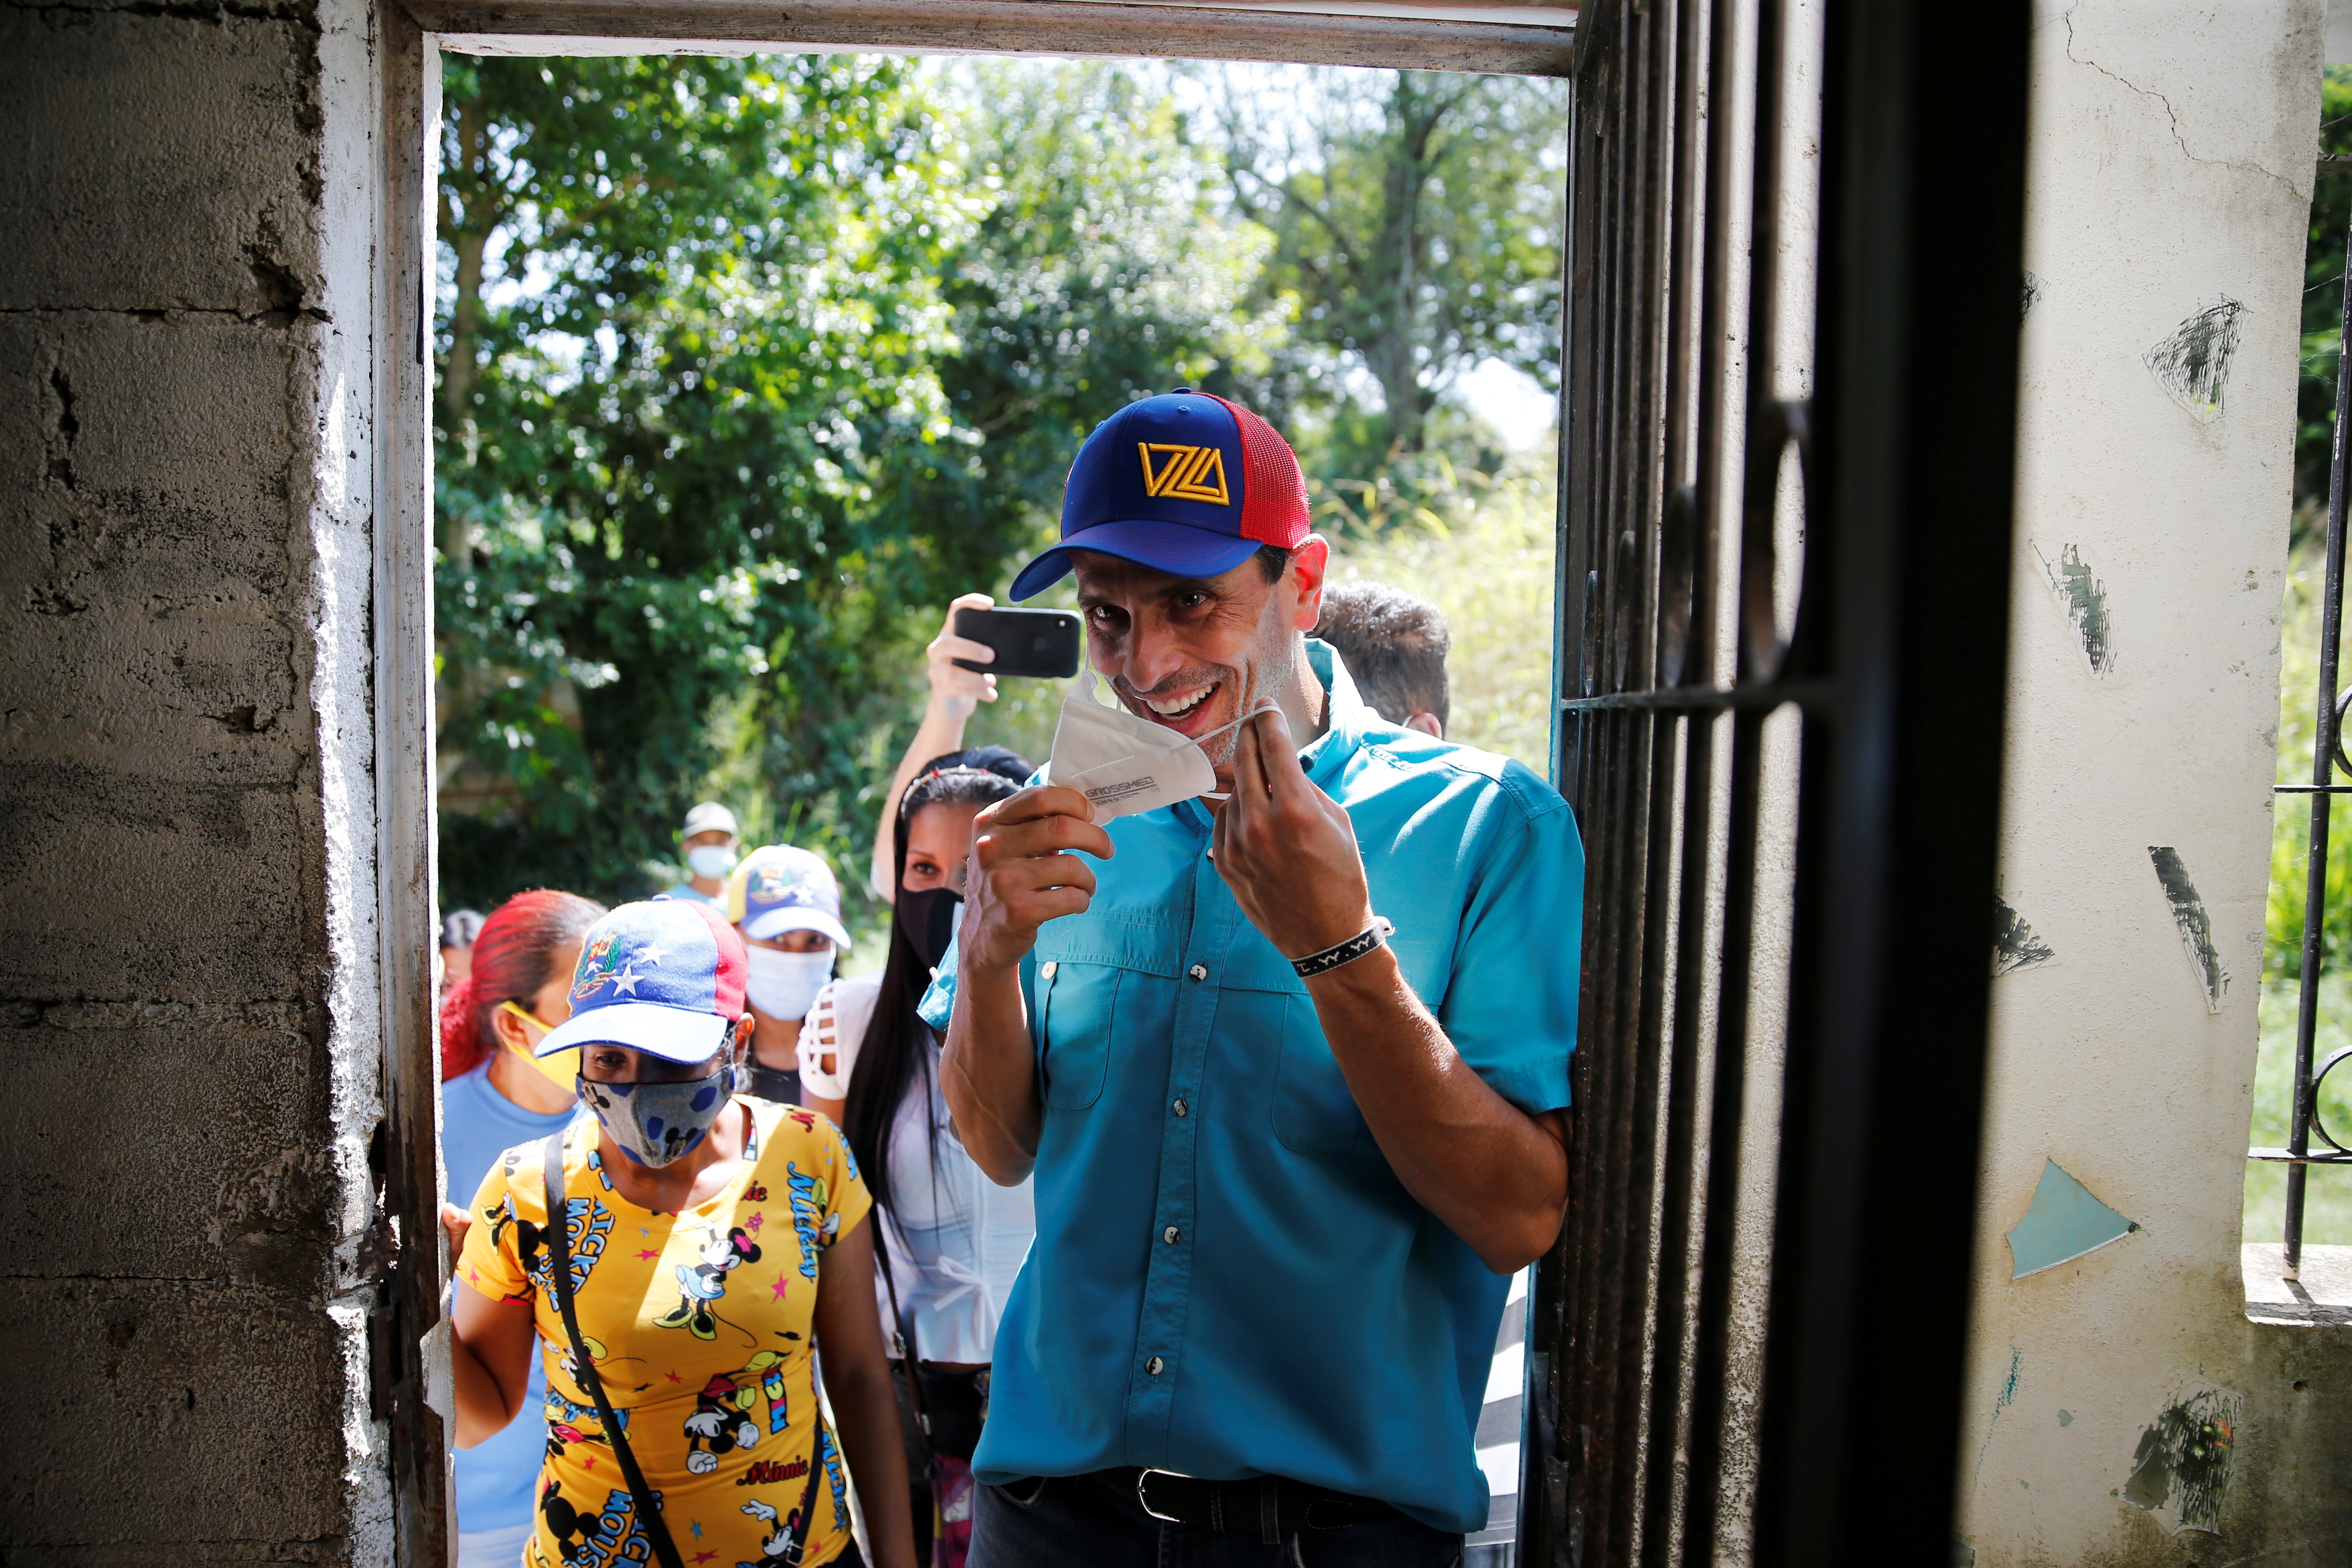 Opposition leader Henrique Capriles arrives at the home of one of his supporters during door-to-door campaigning ahead of the country's regional elections, in Yare, Venezuela October 29, 2021.  REUTERS/Leonardo Fernandez Viloria